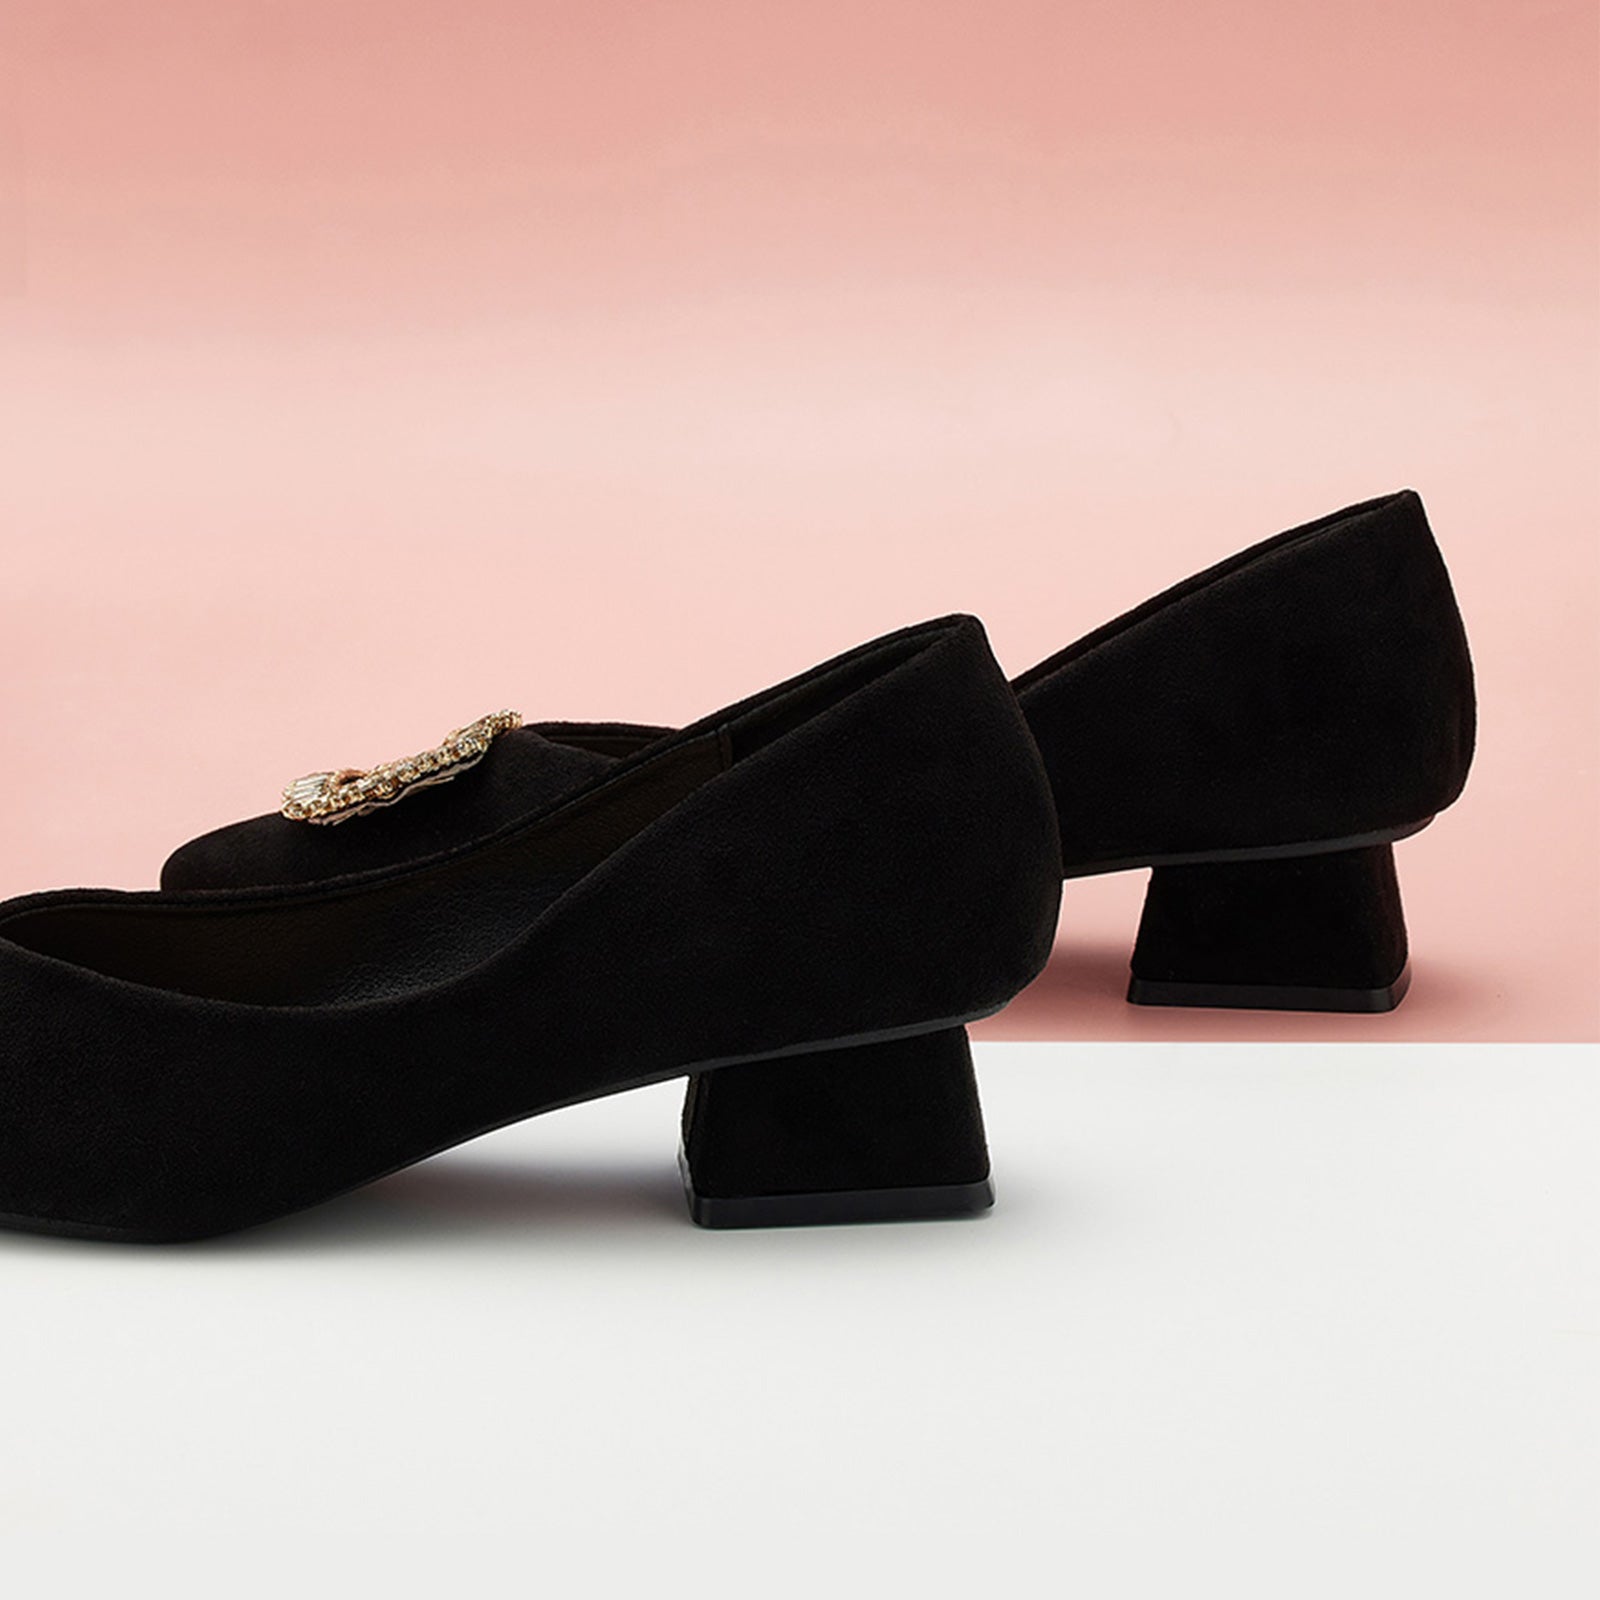 Black Suede Pumps adorned with embellishments, a must-have for a polished wardrobe